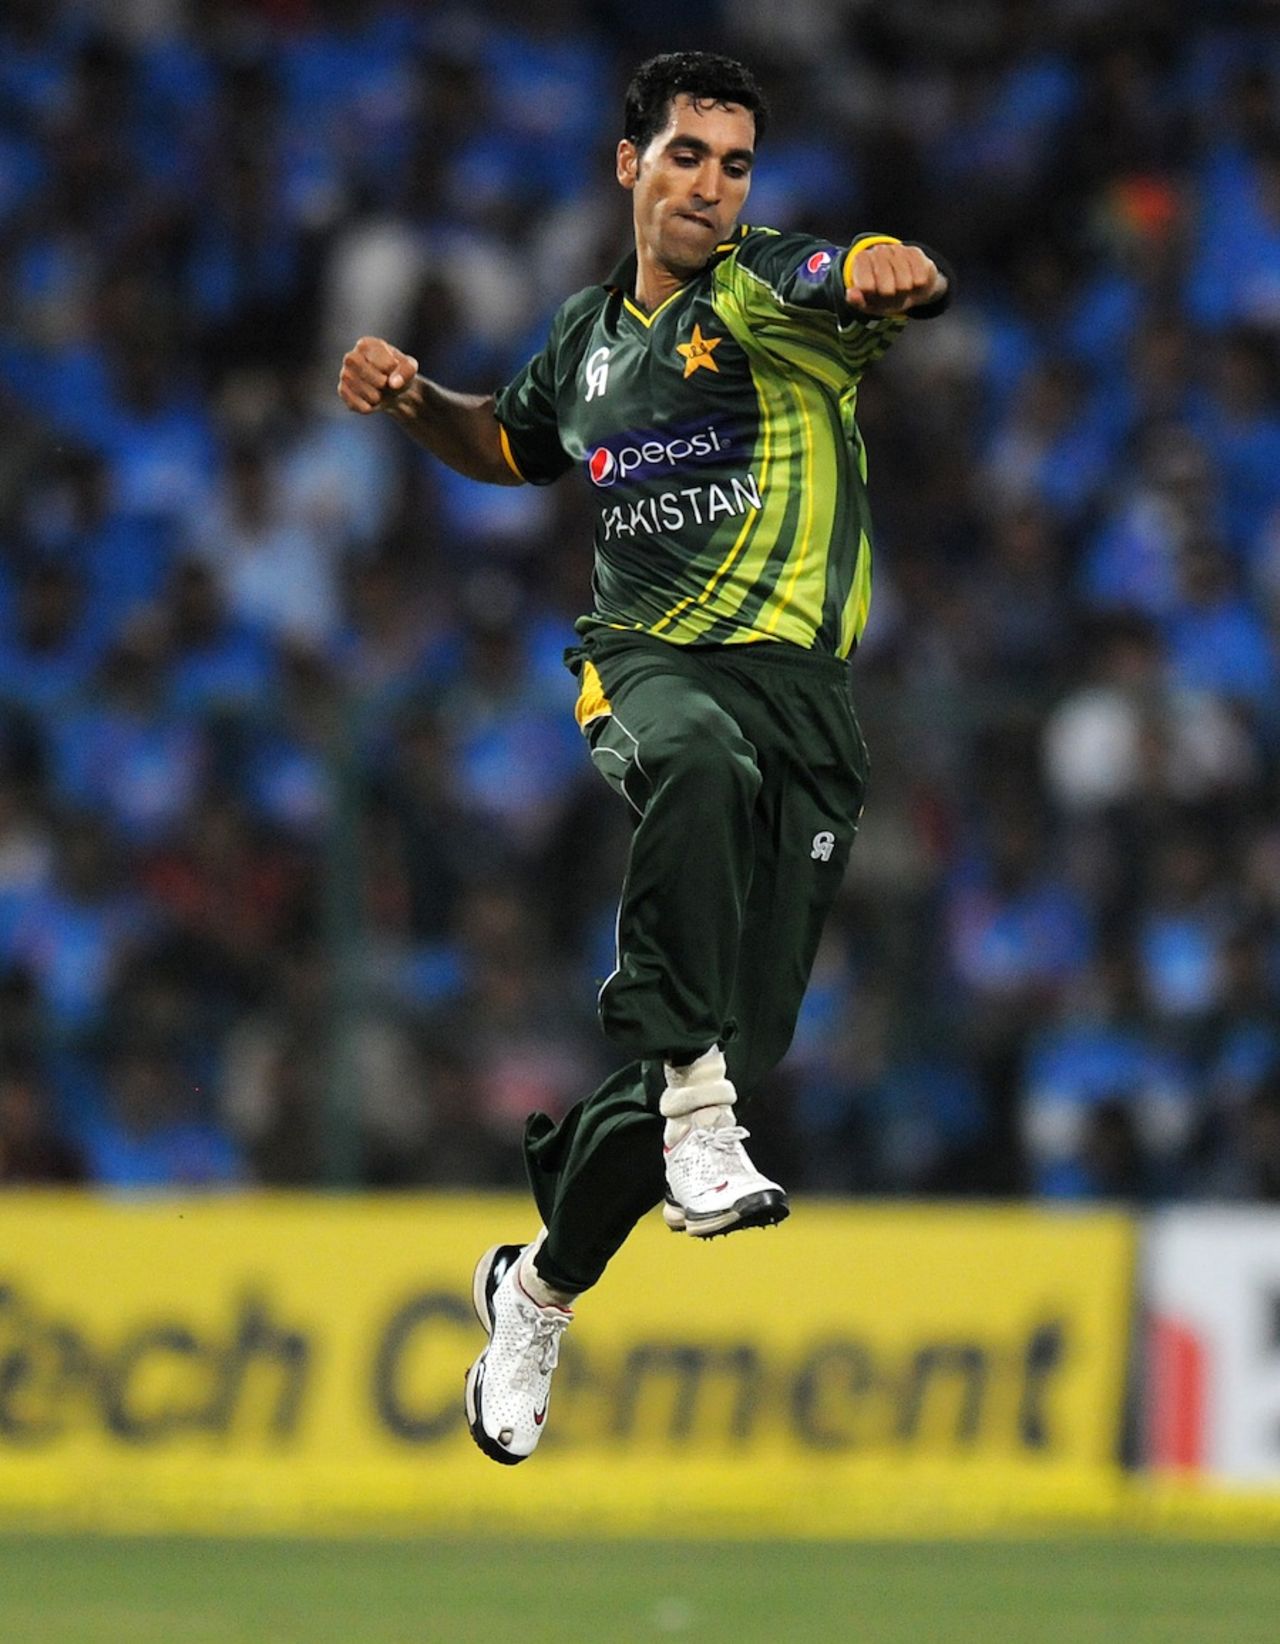 Umar Gul leaps after picking up a wicket, India v Pakistan, 1st T20, Bangalore, December 25, 2012